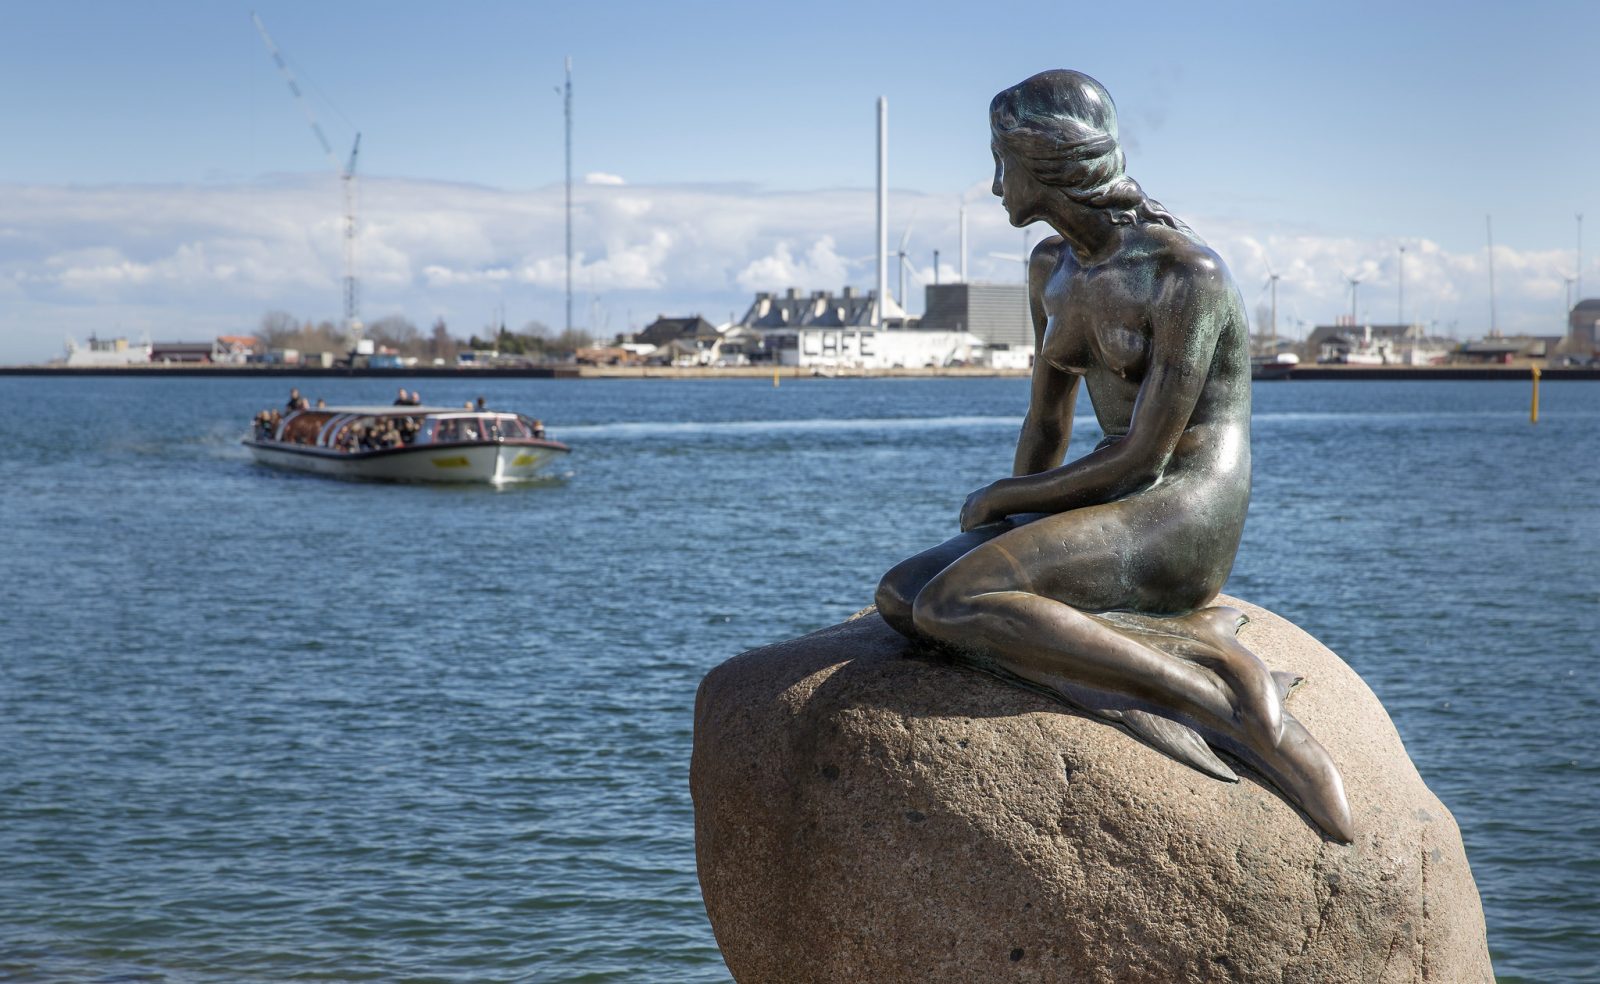 🗽 Can You Match These Famous Statues to Their Locations? The Little Mermaid Statue In Copenhagen, Denmark